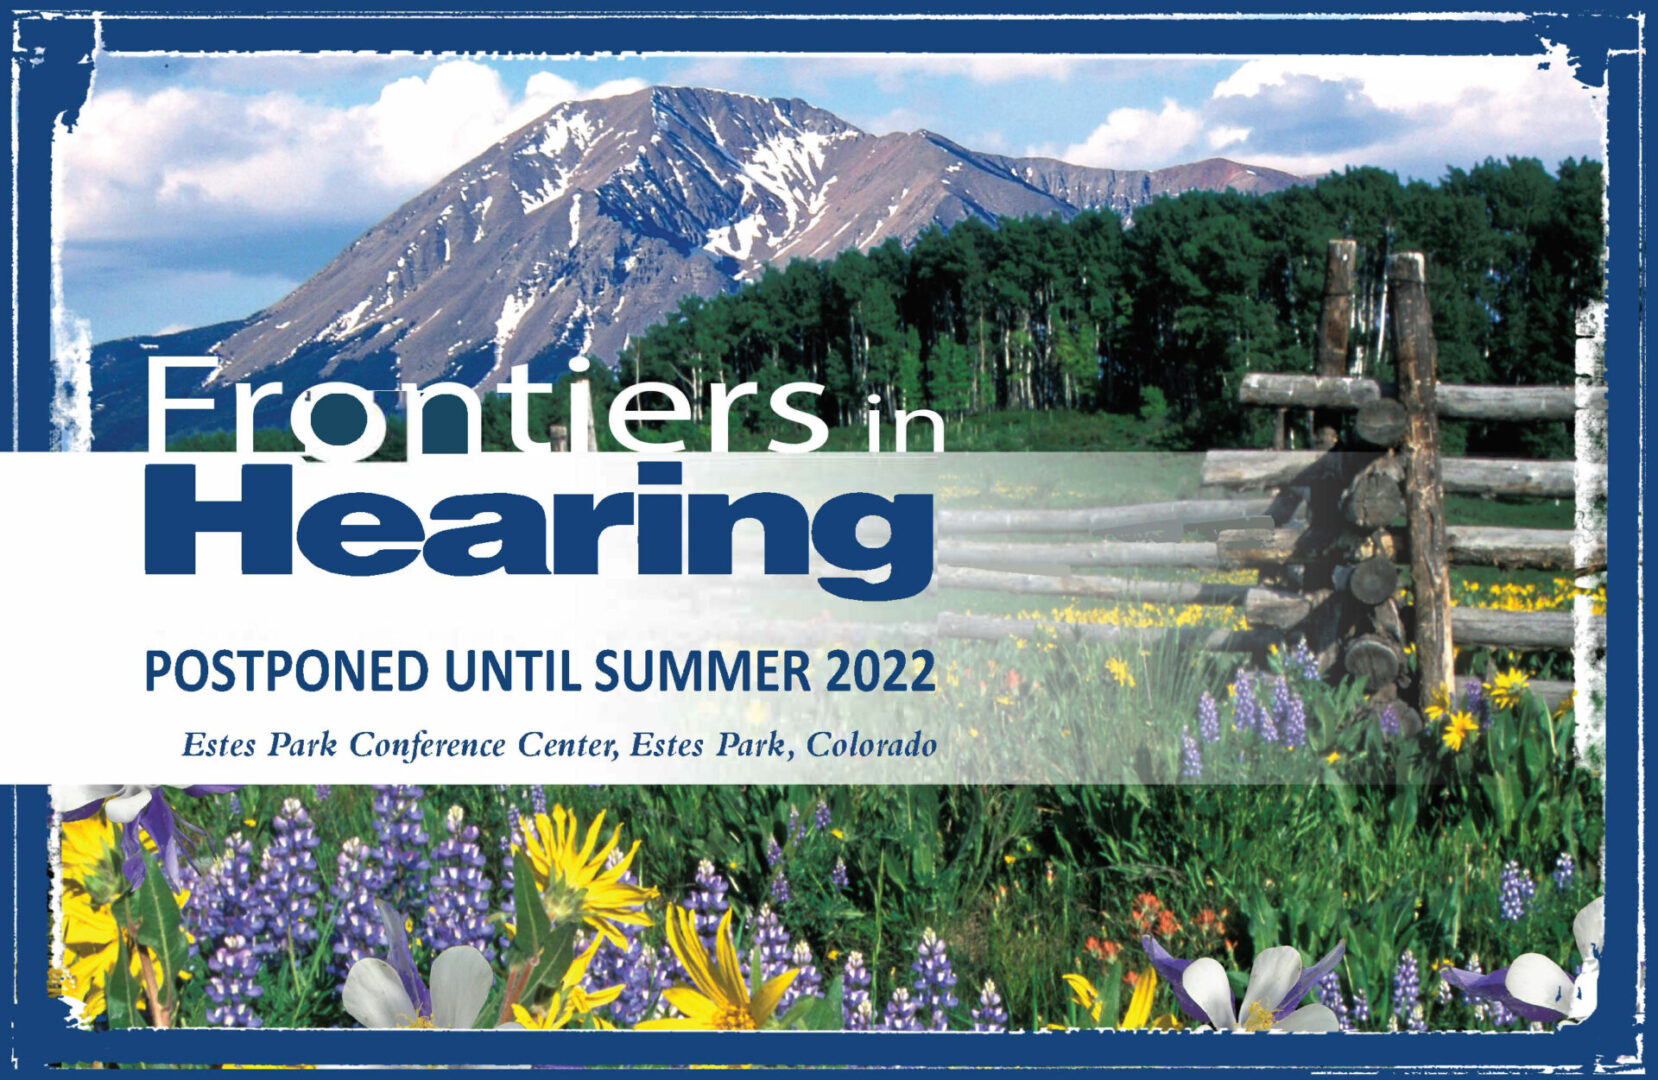 Frontiers in Hearing announcement